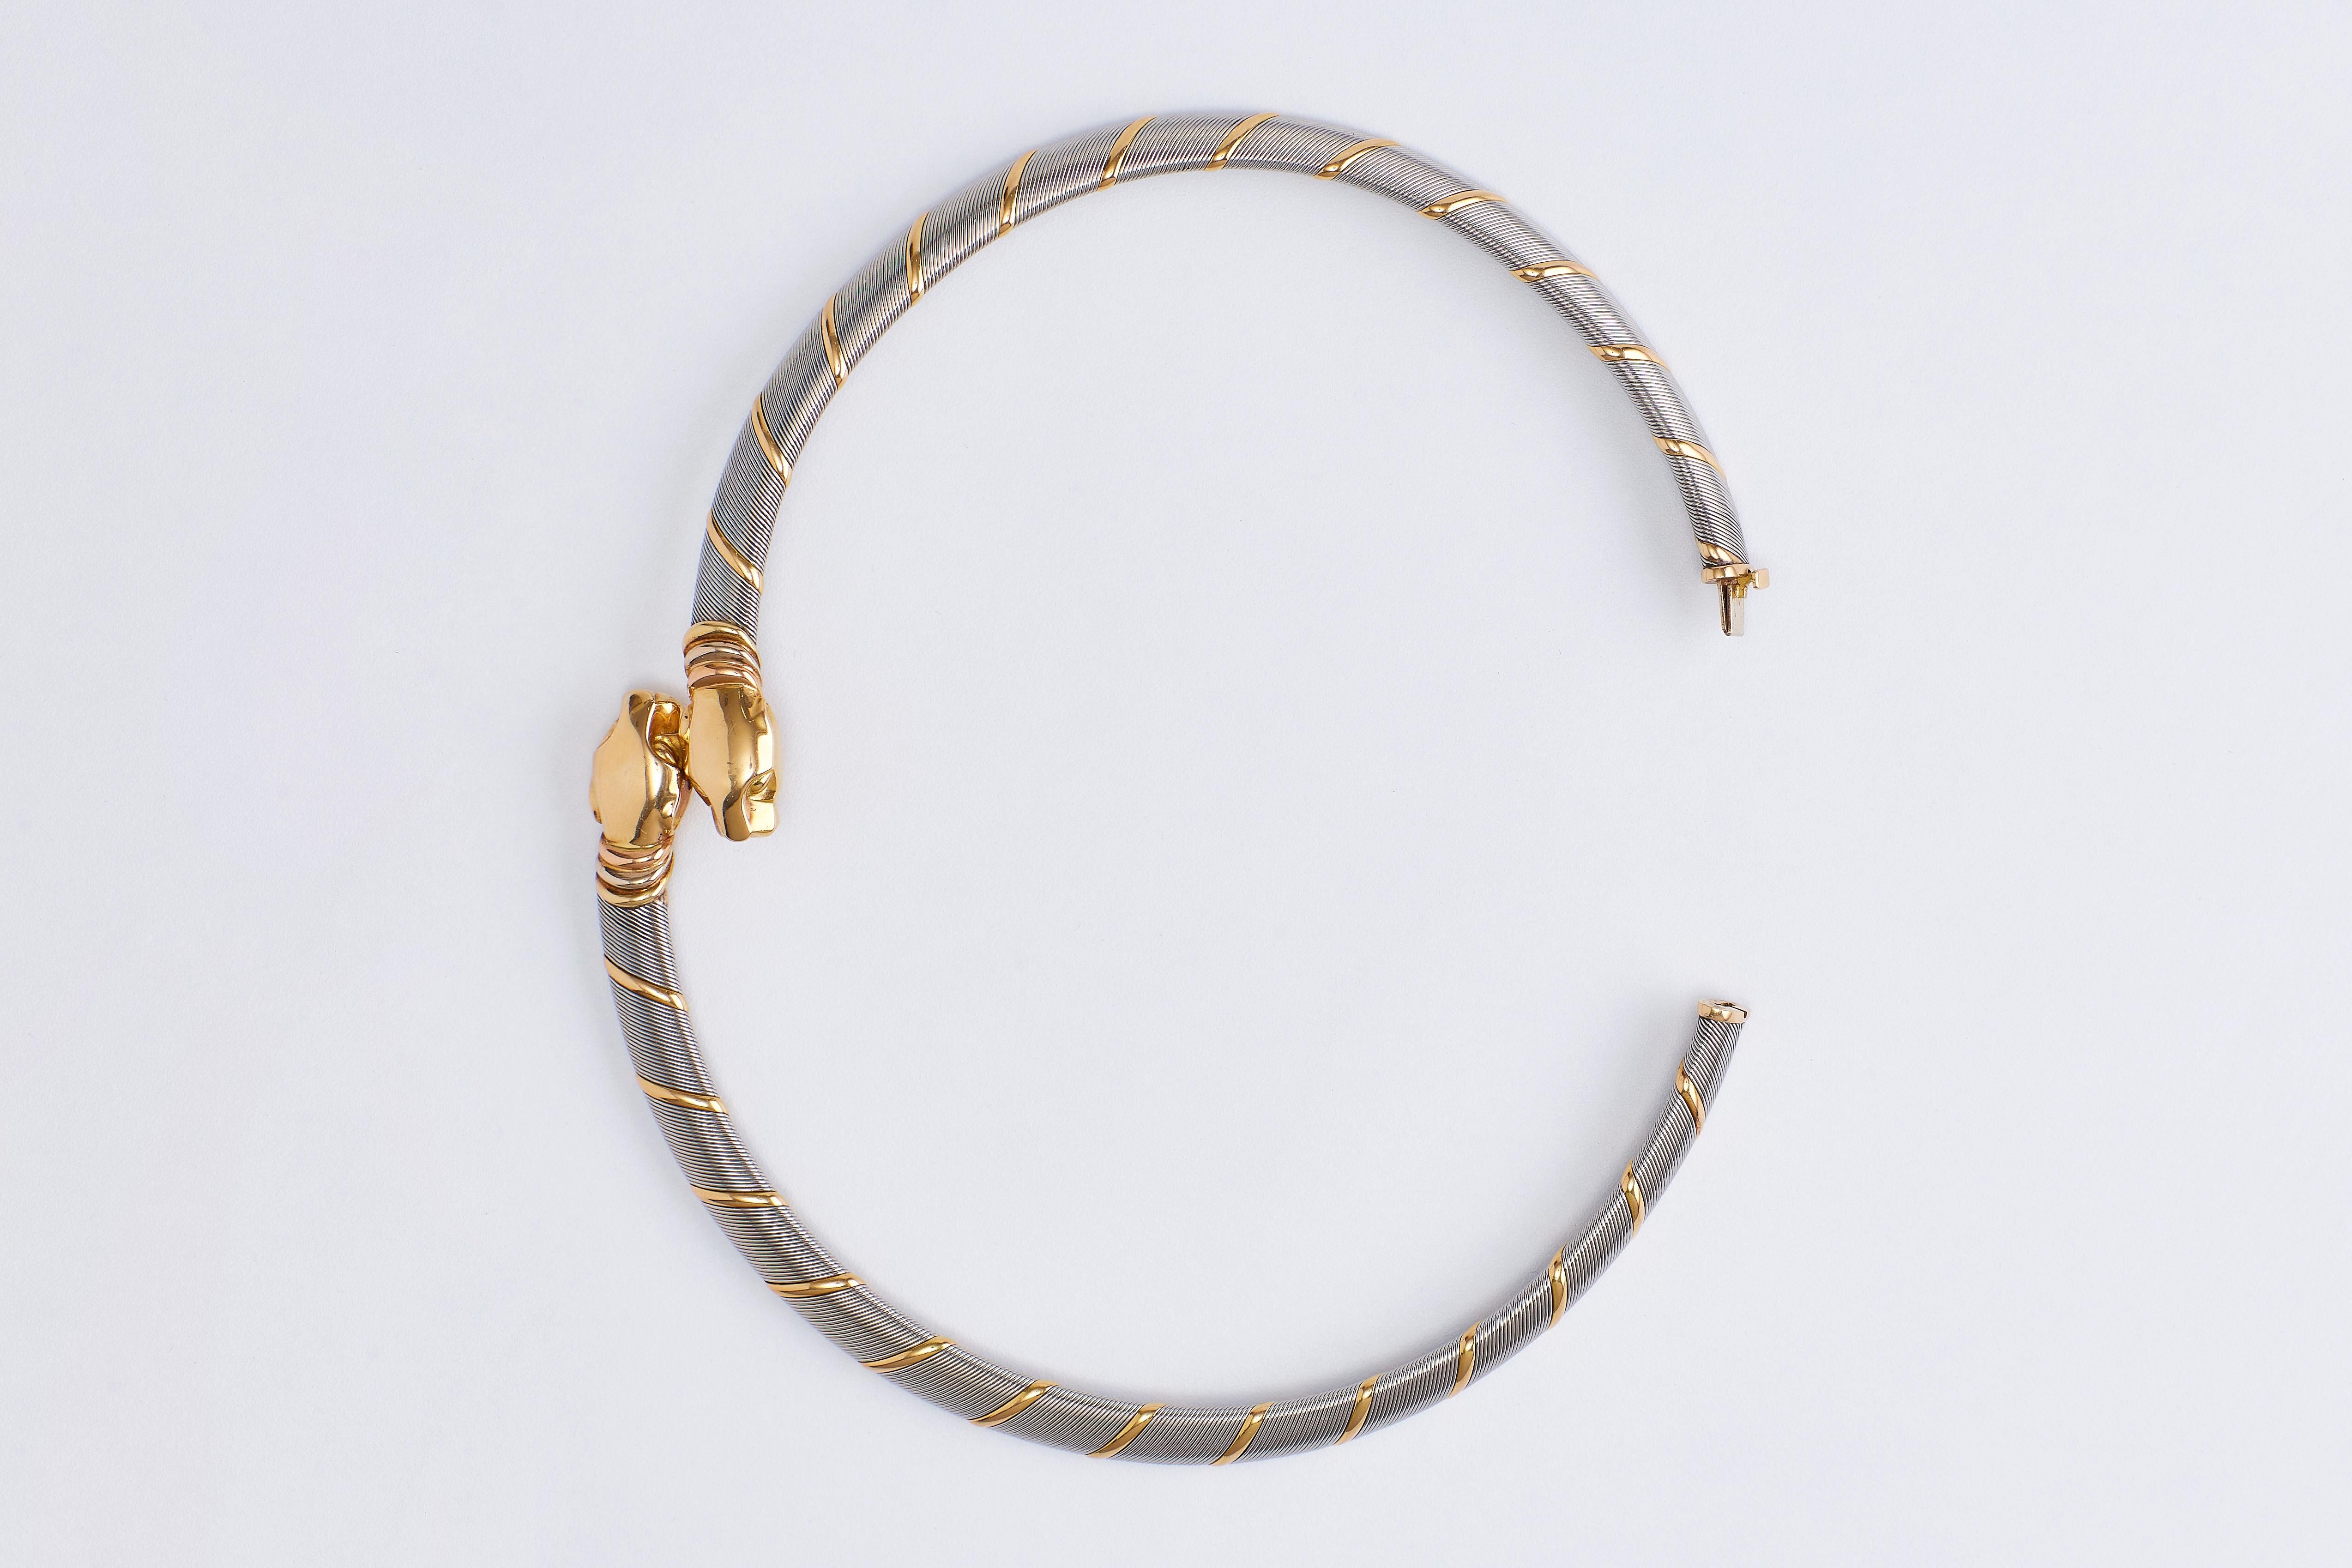 Cartier Choker (collar) 18 Karat Gold Double Headed Panther Necklace.
Authentic magnificent Cartier white and yellow gold necklace with double panthere head. 
Signed no. 996241.
Total weight: 73 grams.
